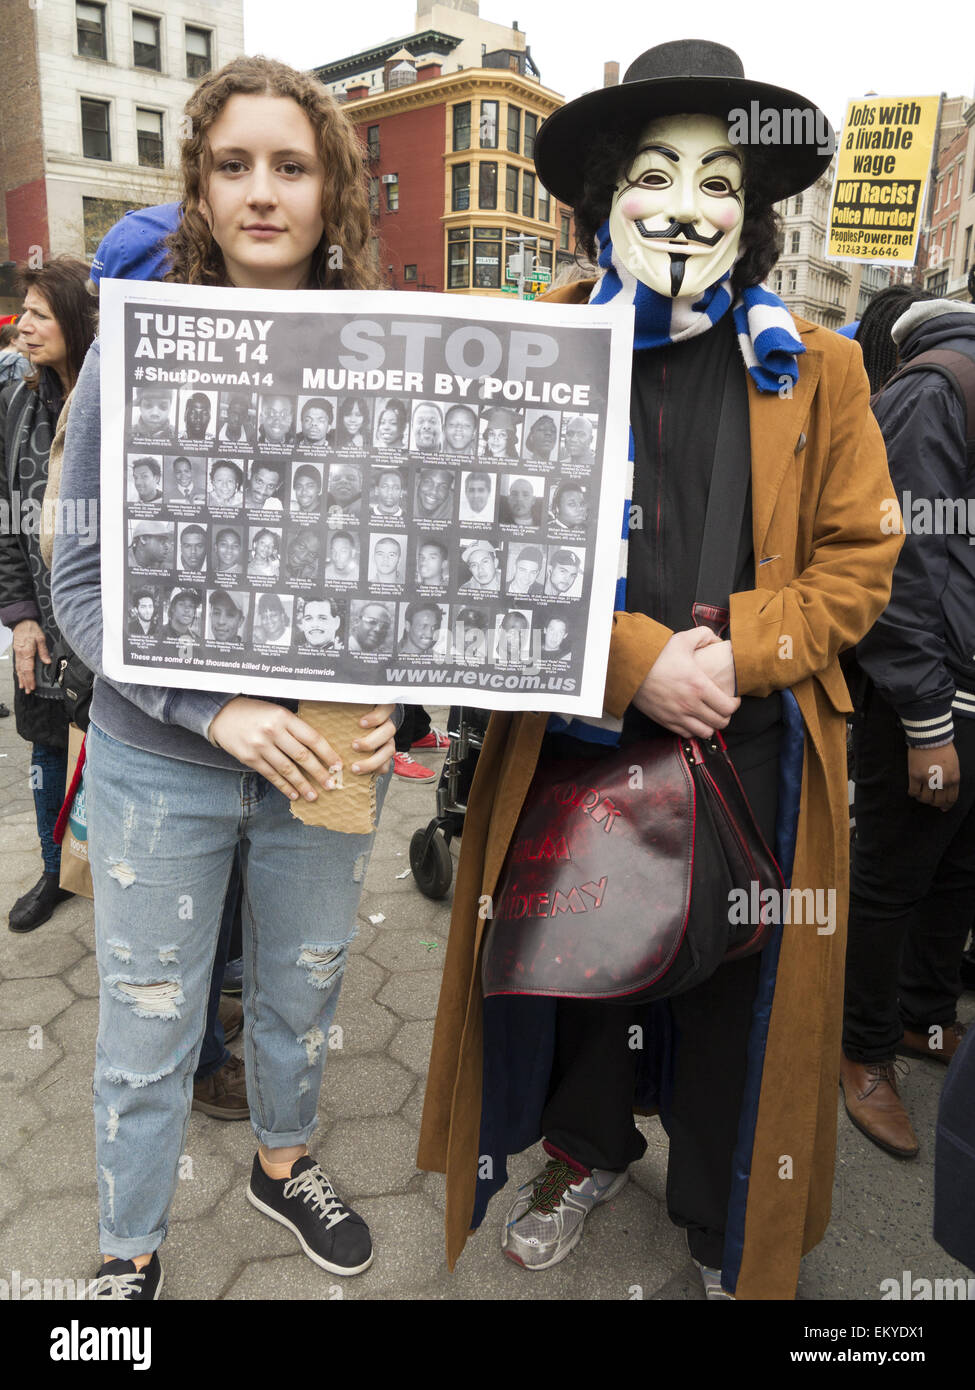 Protest against police brutality and the killing of unarmed black men at Union Square in NYC, April 14, 2015. Stock Photo